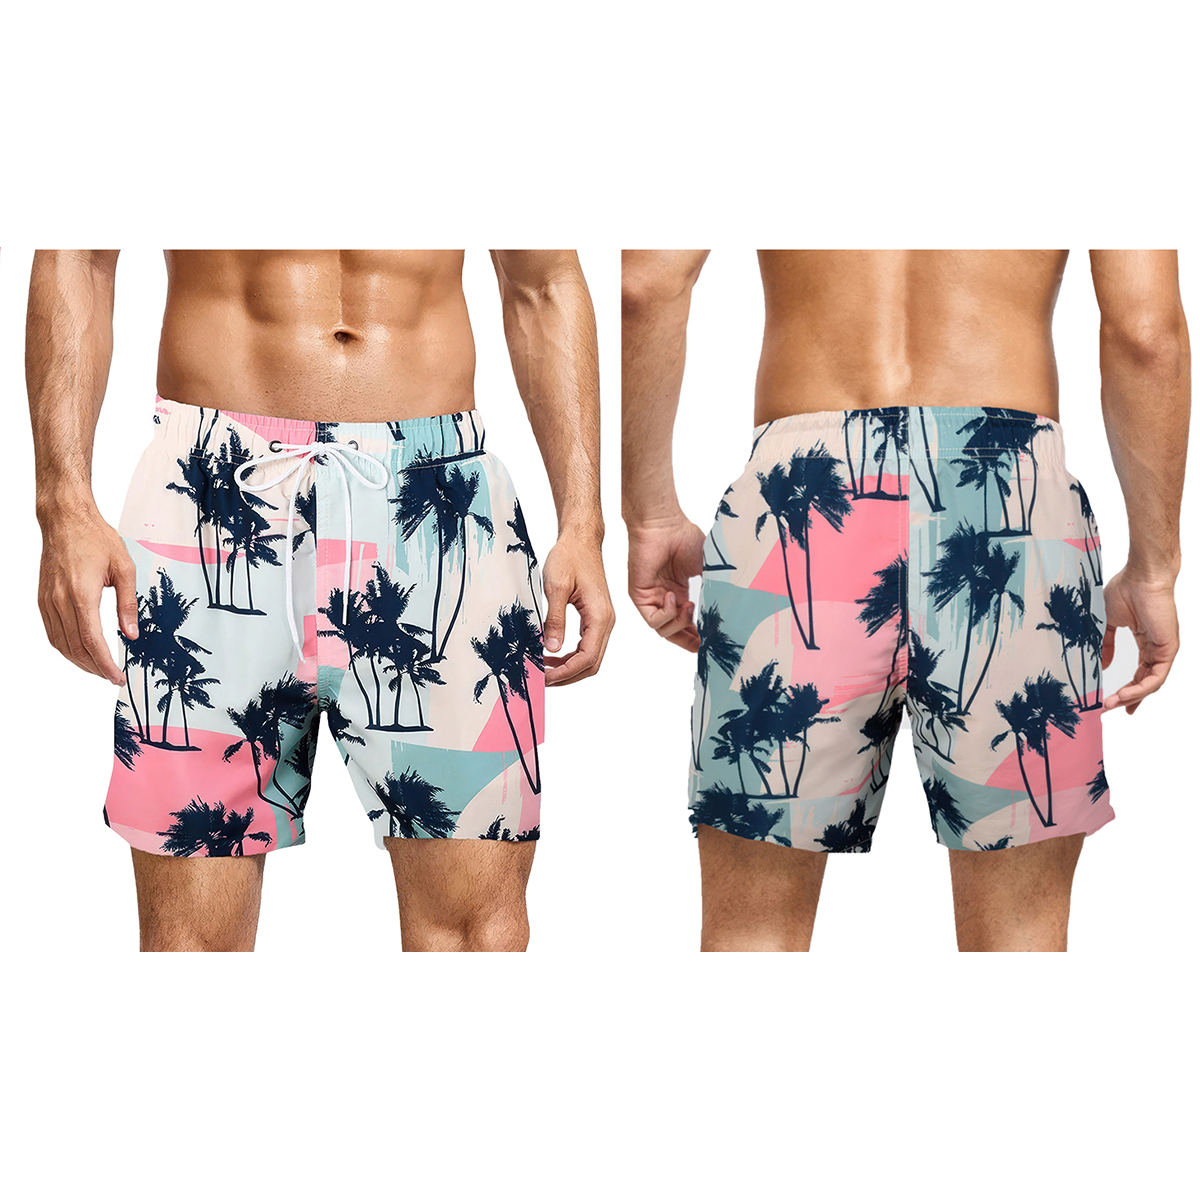 3-Pack: Men's Quick-Dry Solid & Printed Summer Beach Surf Board Swim Trunks Shorts - XX-Large, Printed